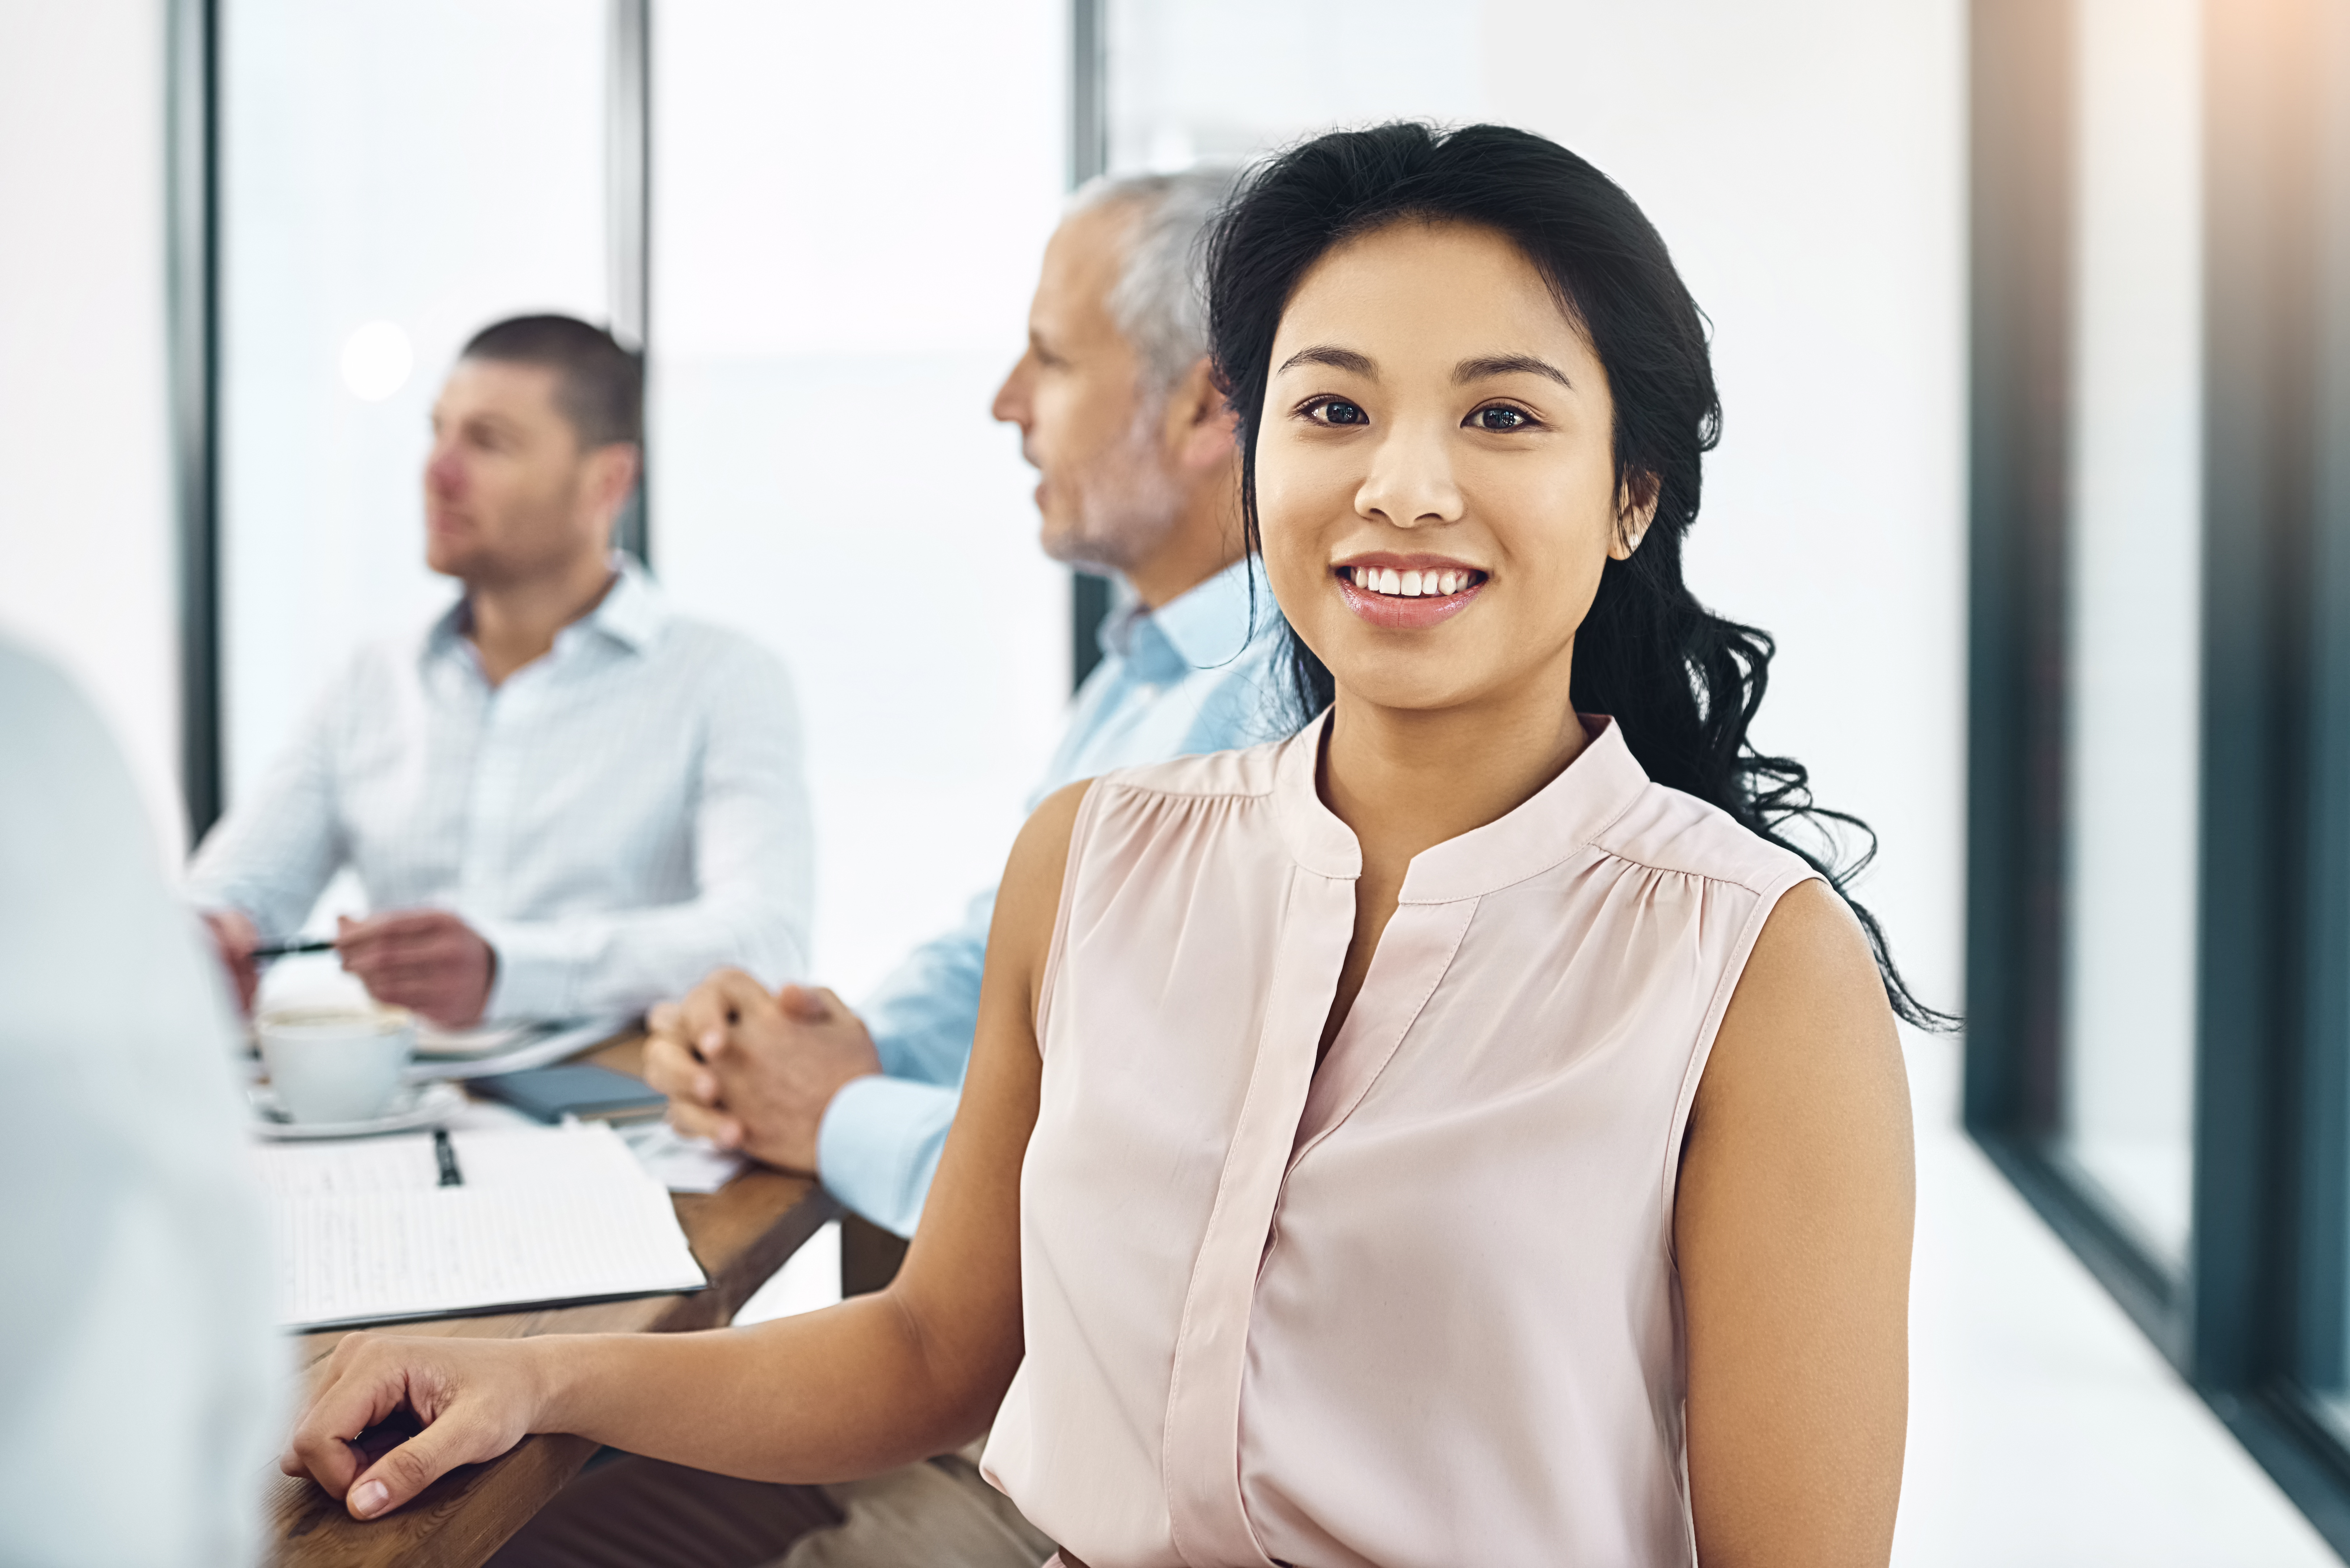 5 Steps Organizations Can Take to Support Women's Career Advancement  